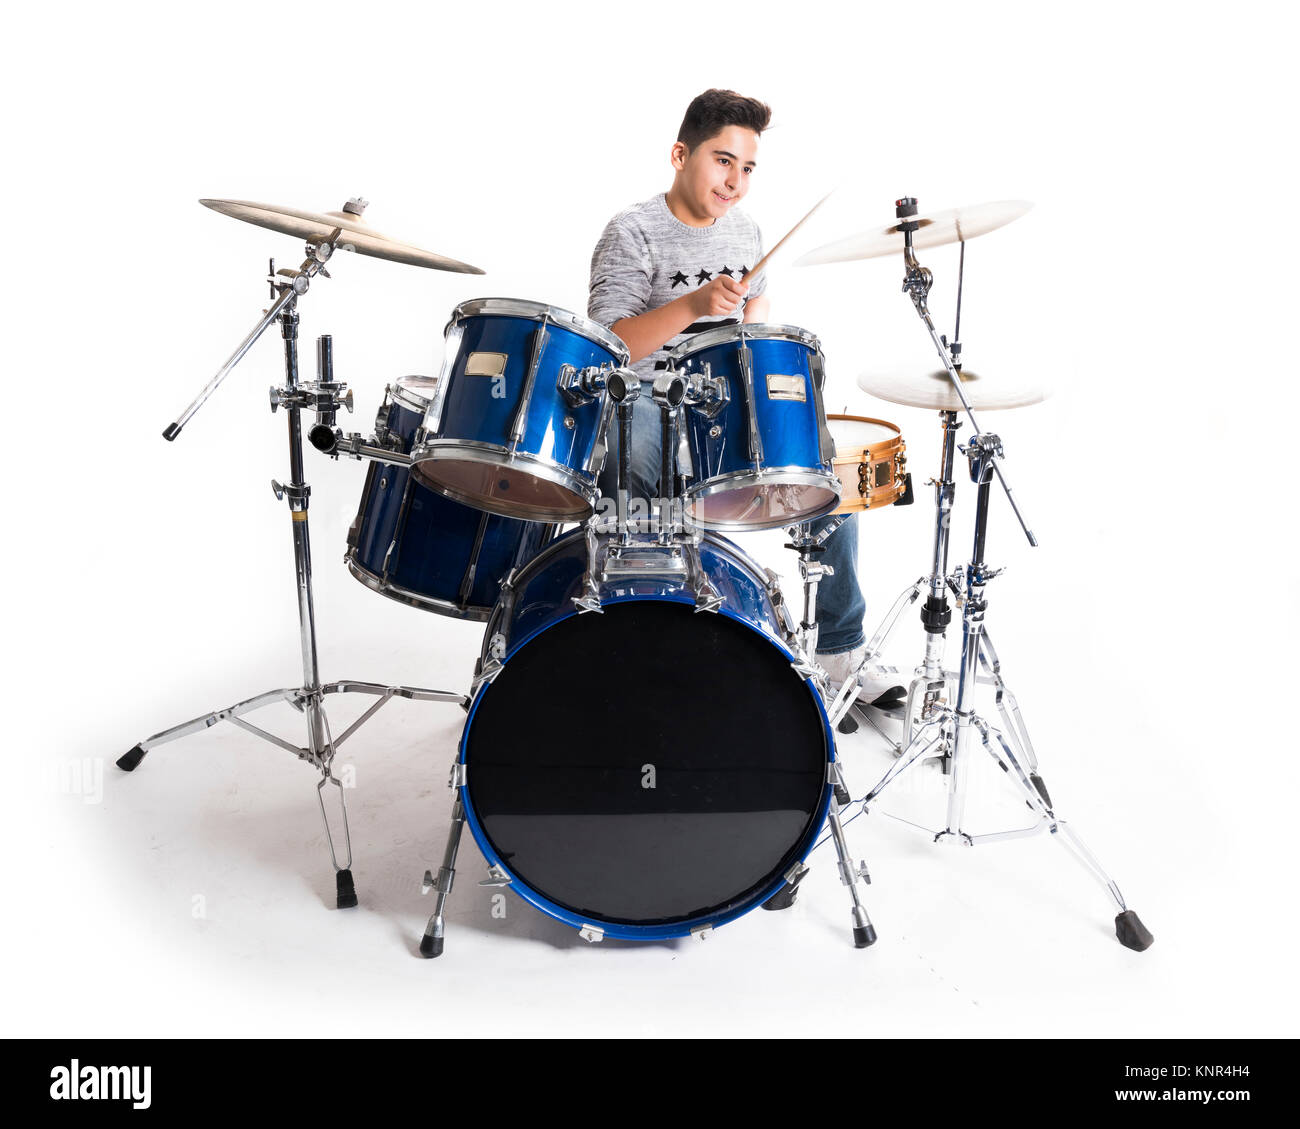 teen boy at drumset in studio against white background Stock Photo